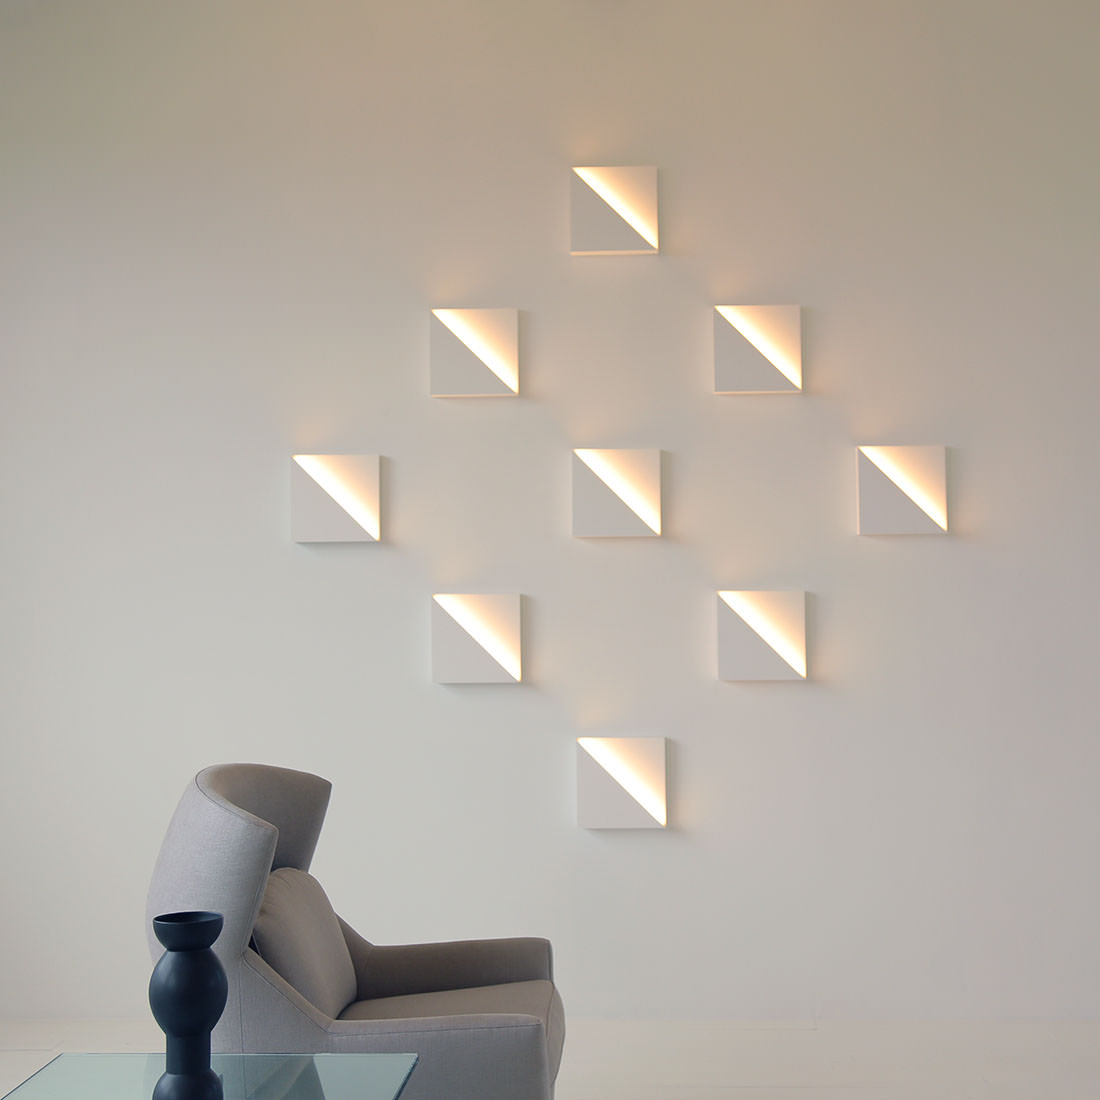 Cycladic Square Sconce Installed